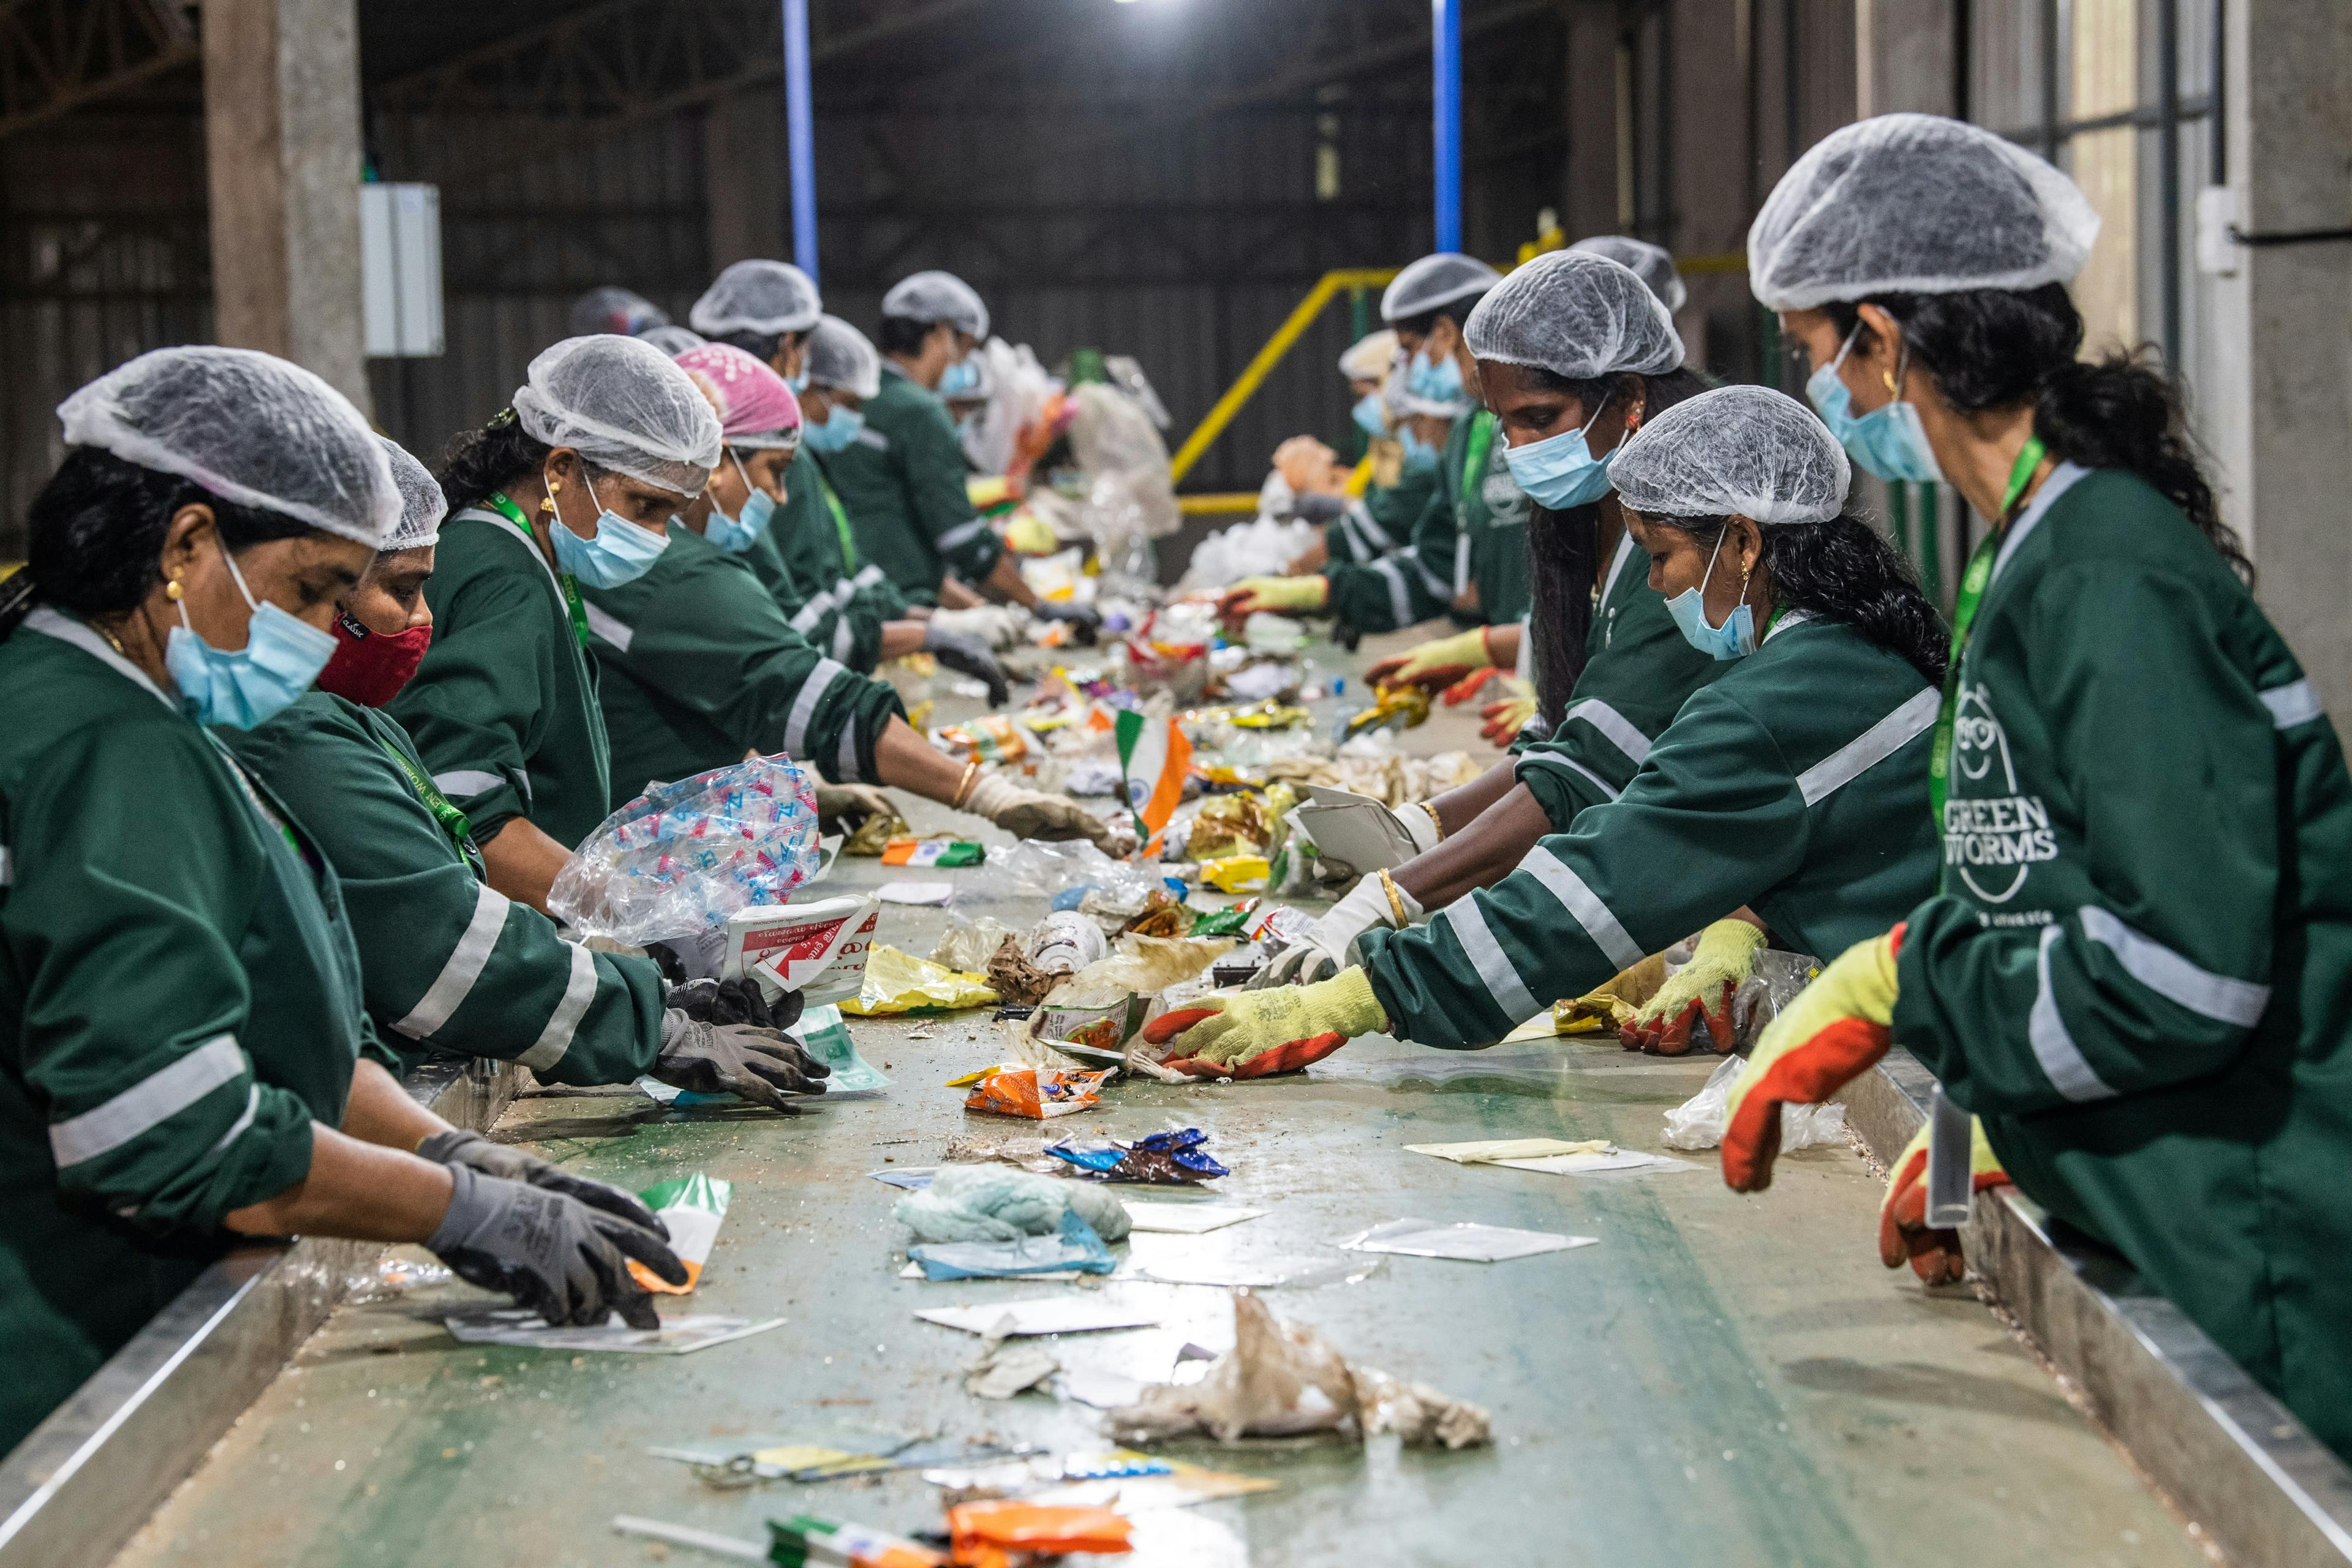 Looking over a sorting line with various pieces of waste on it. On each side, women wearing green uniforms and hair nets are sorting different pieces.